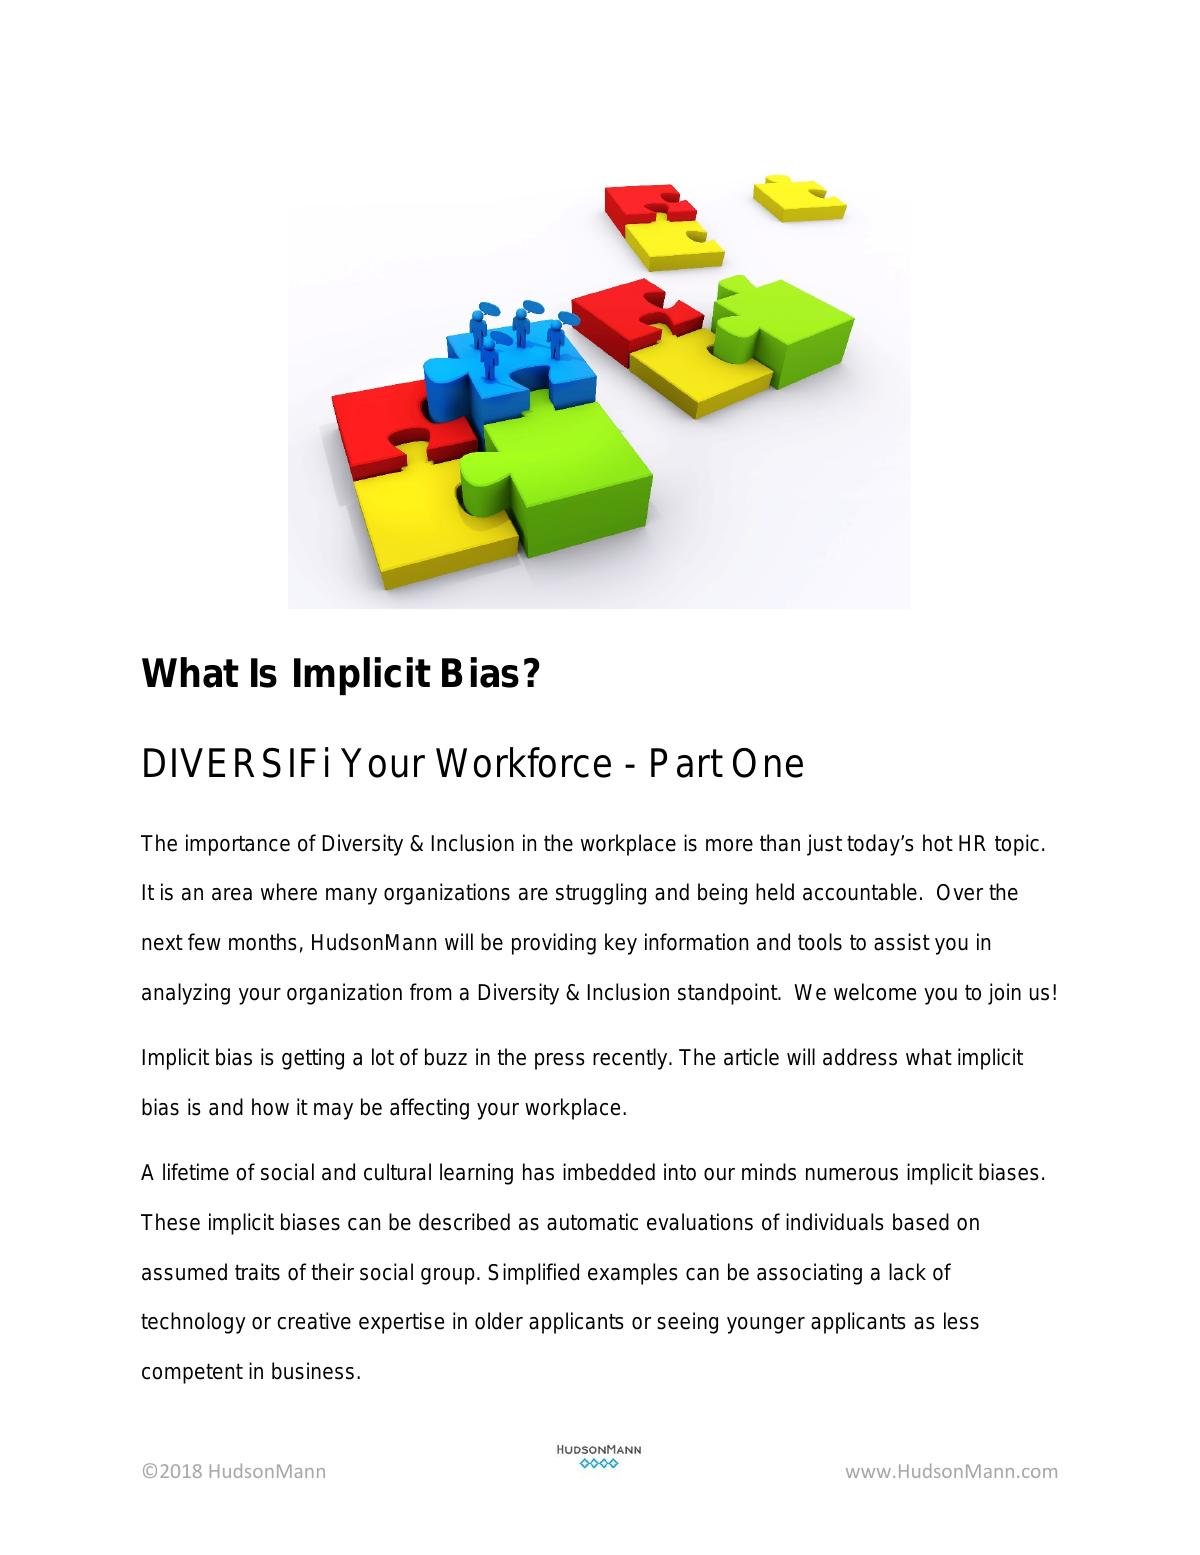 Is Implicit Bias Affecting Your Workplace?